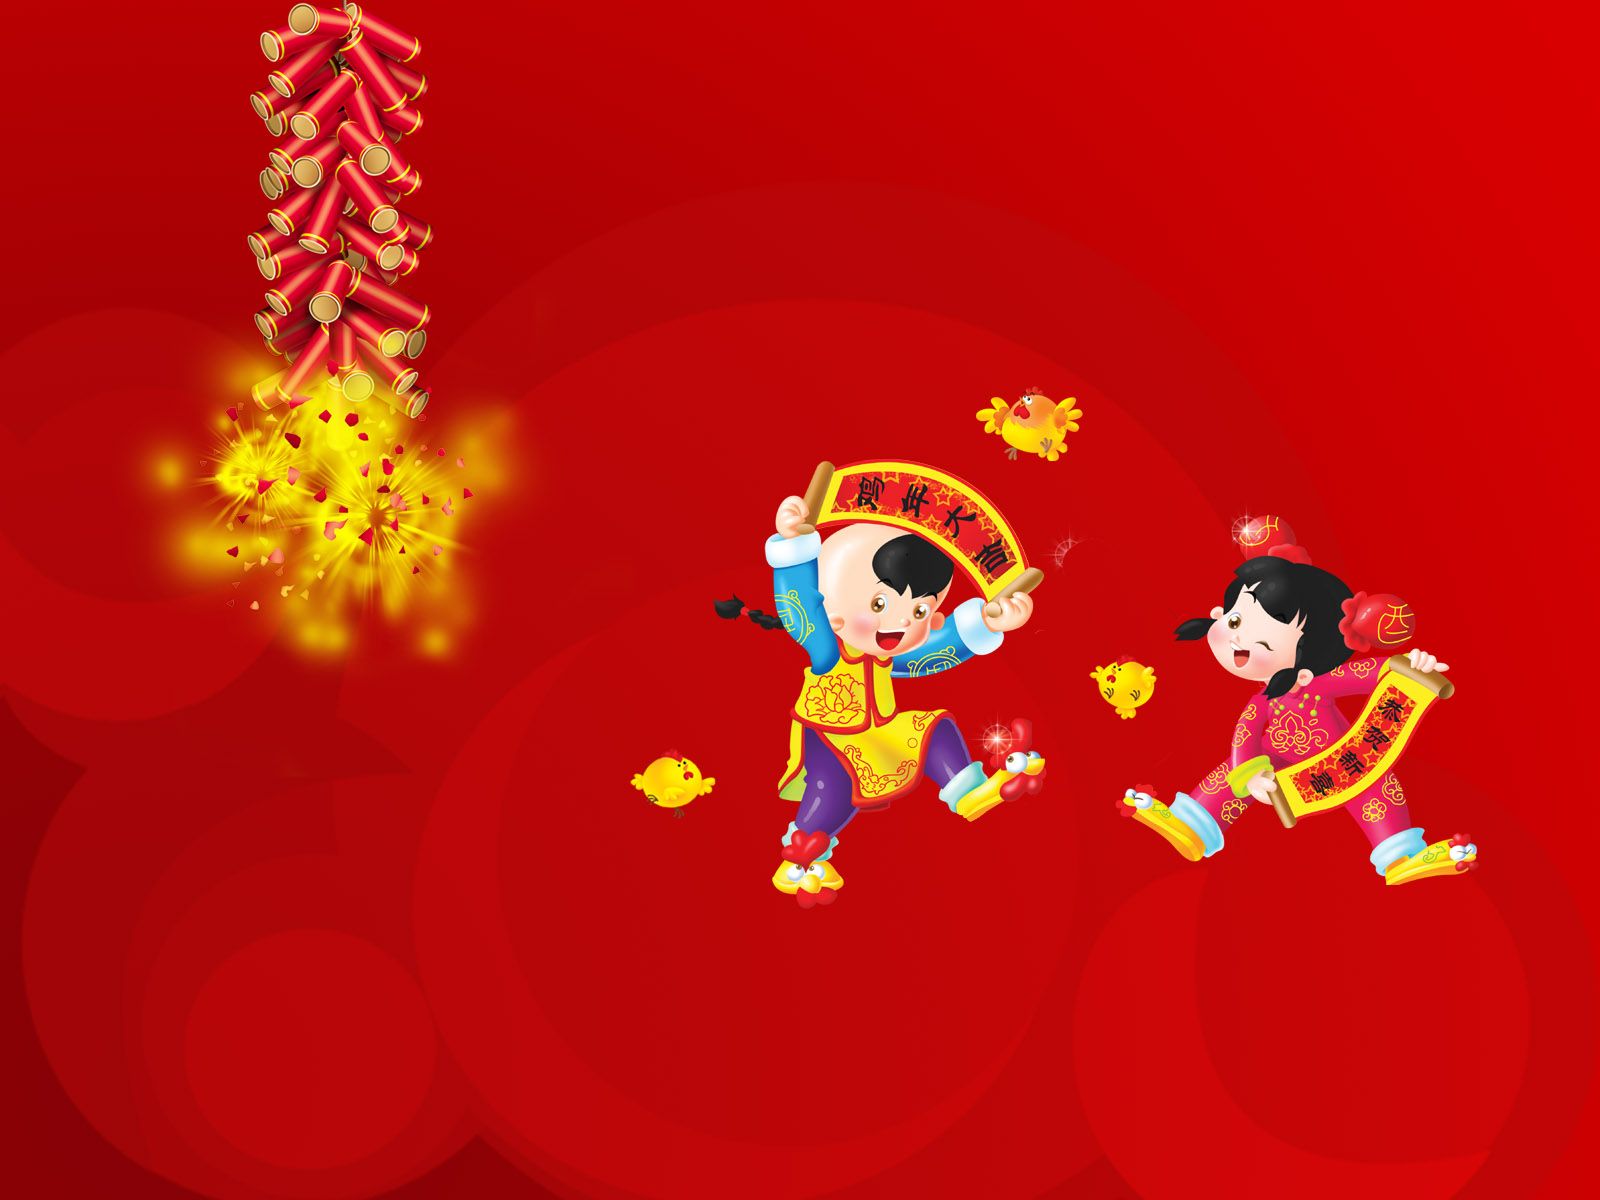 Chinese New Year 2014 Wallpaper .bwallpaper.com